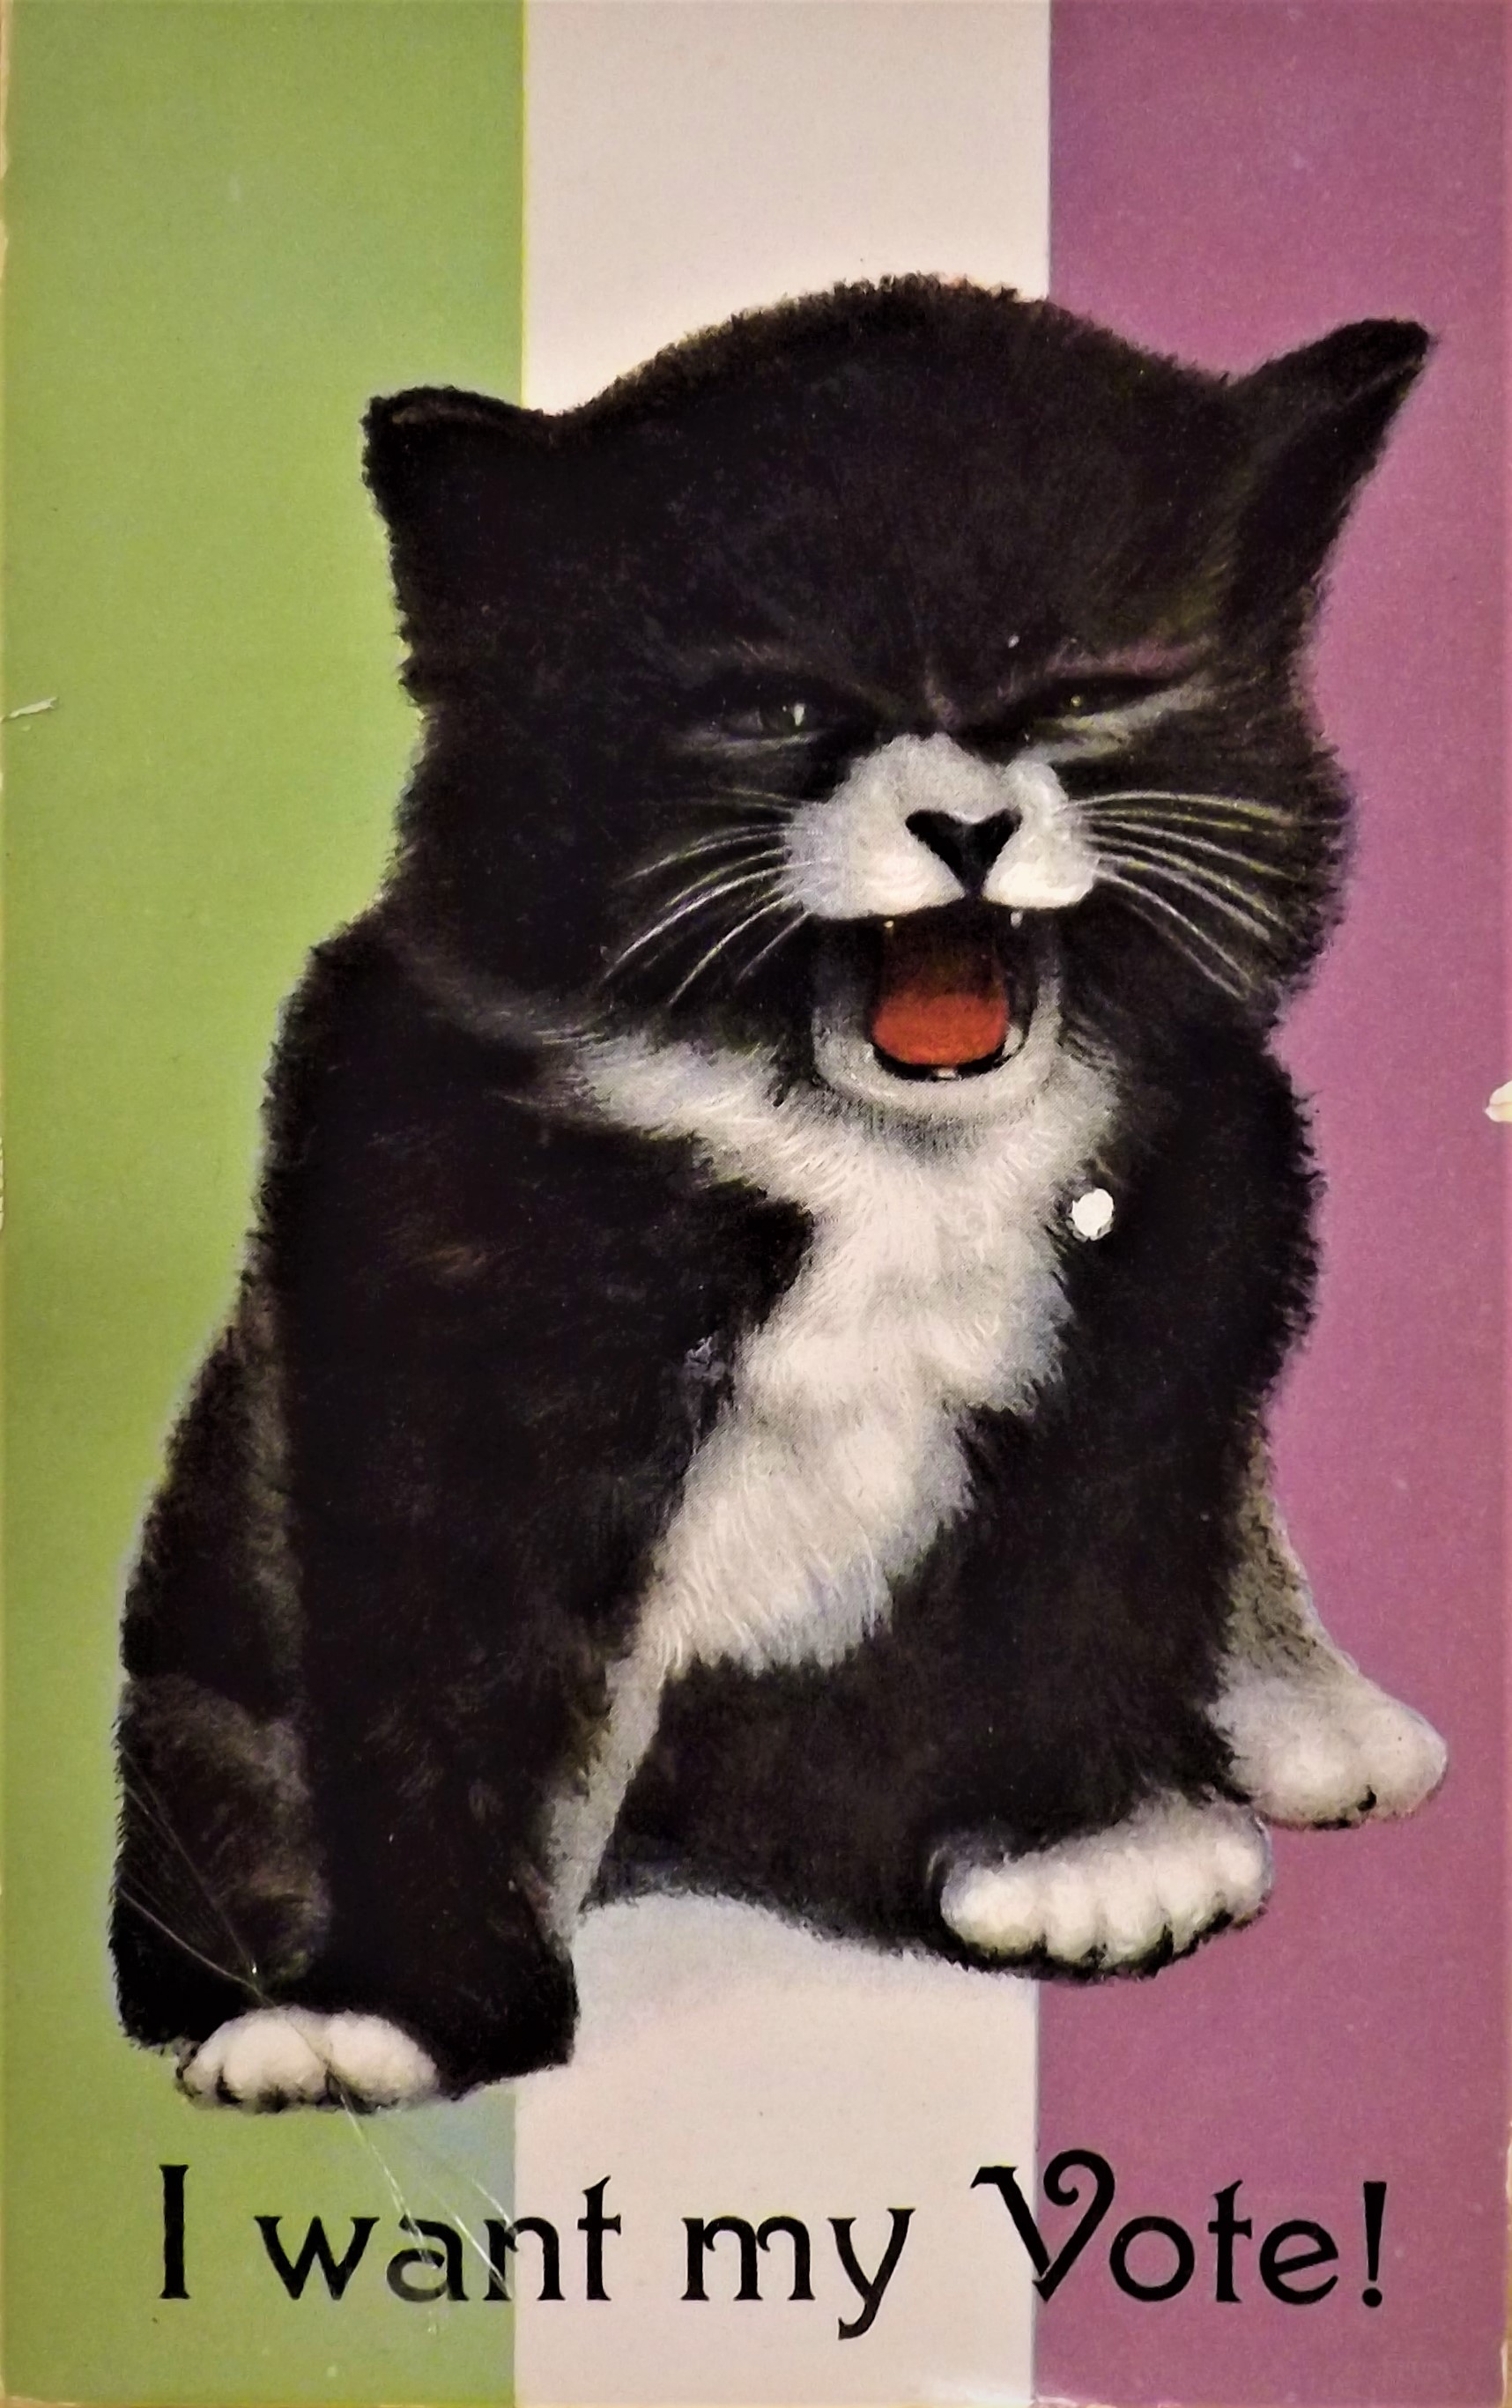 Political satirical card of the suffragette period - Kitten, spitting, on green white and mauve striped background, with the caption 'I want my vote!'